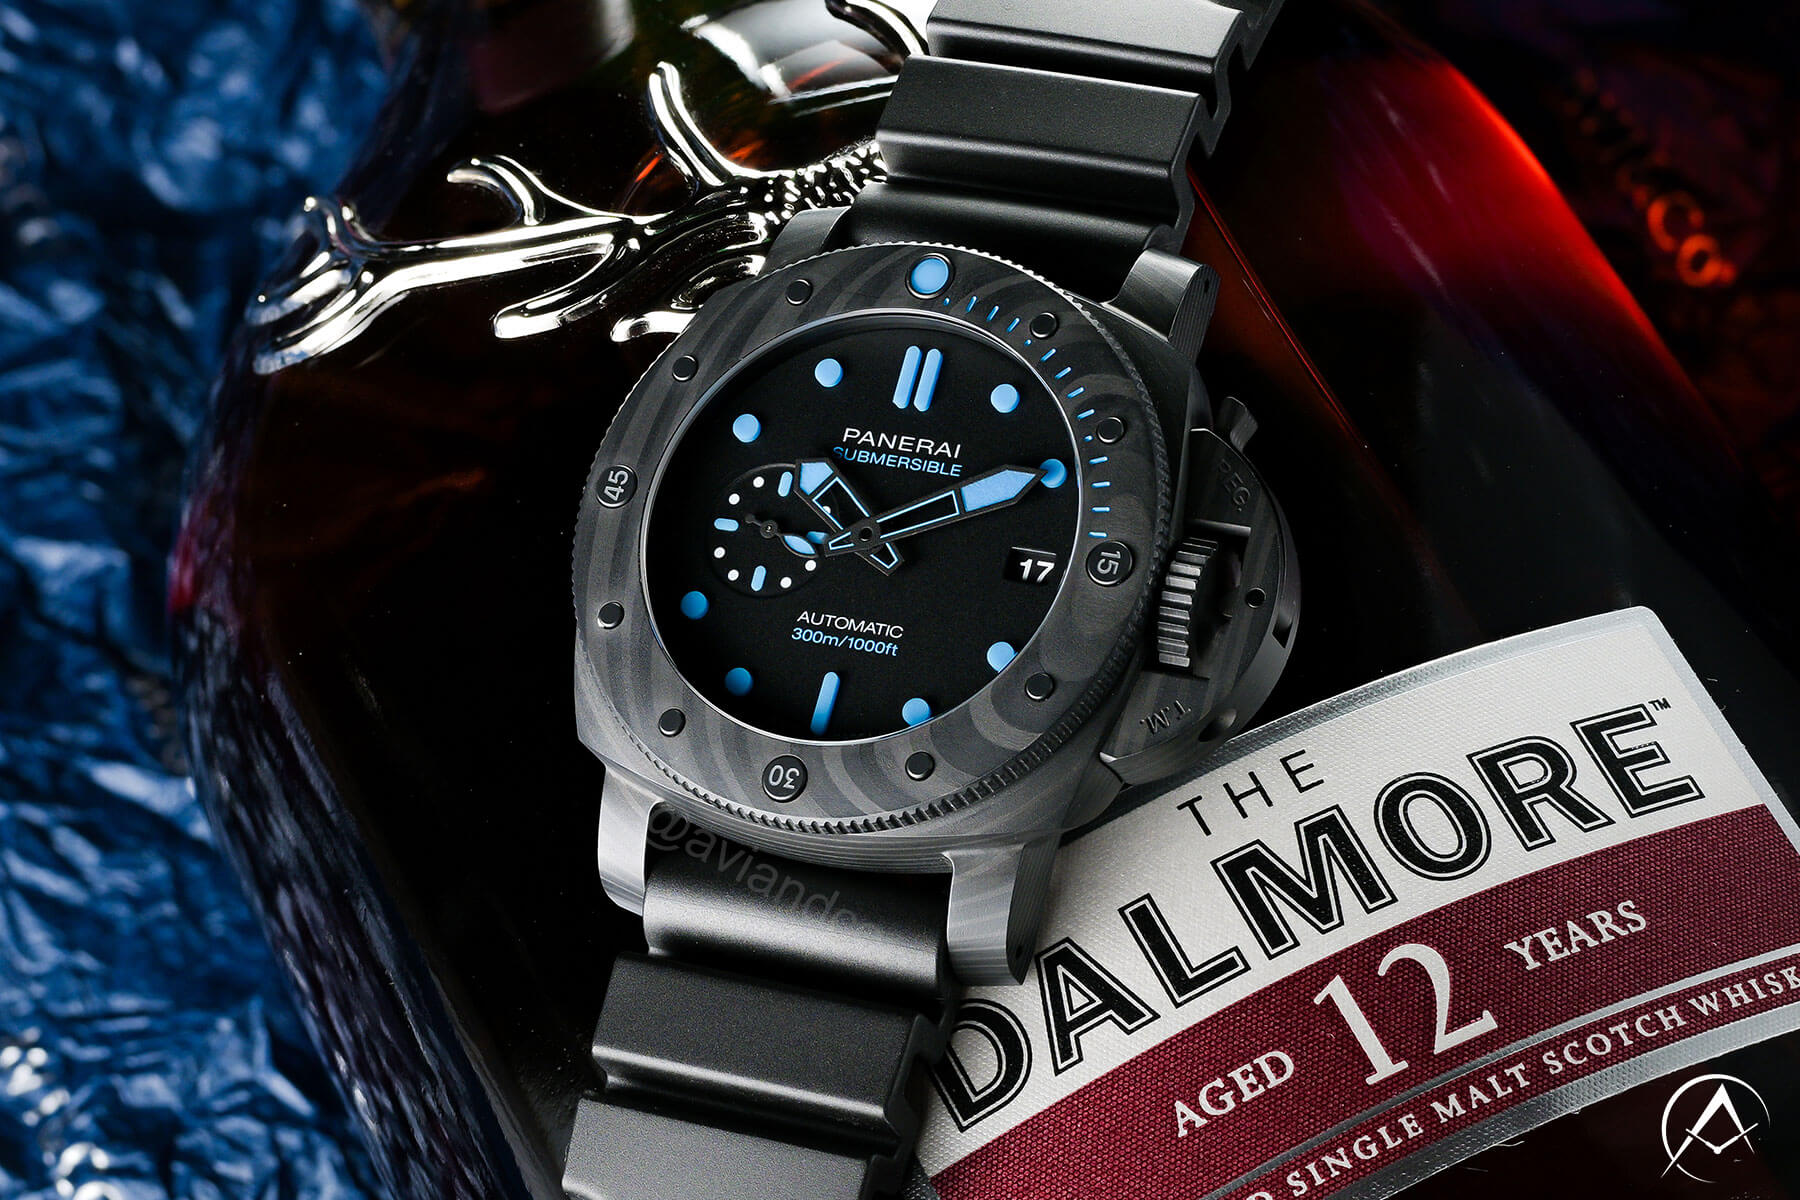 42 mm Carbon Panerai Submersible Luxury Watch with Black Dial, Luminous Dot Hour Markers, Rubber Bracelet, and a 1,000 Foot Water Resistance.